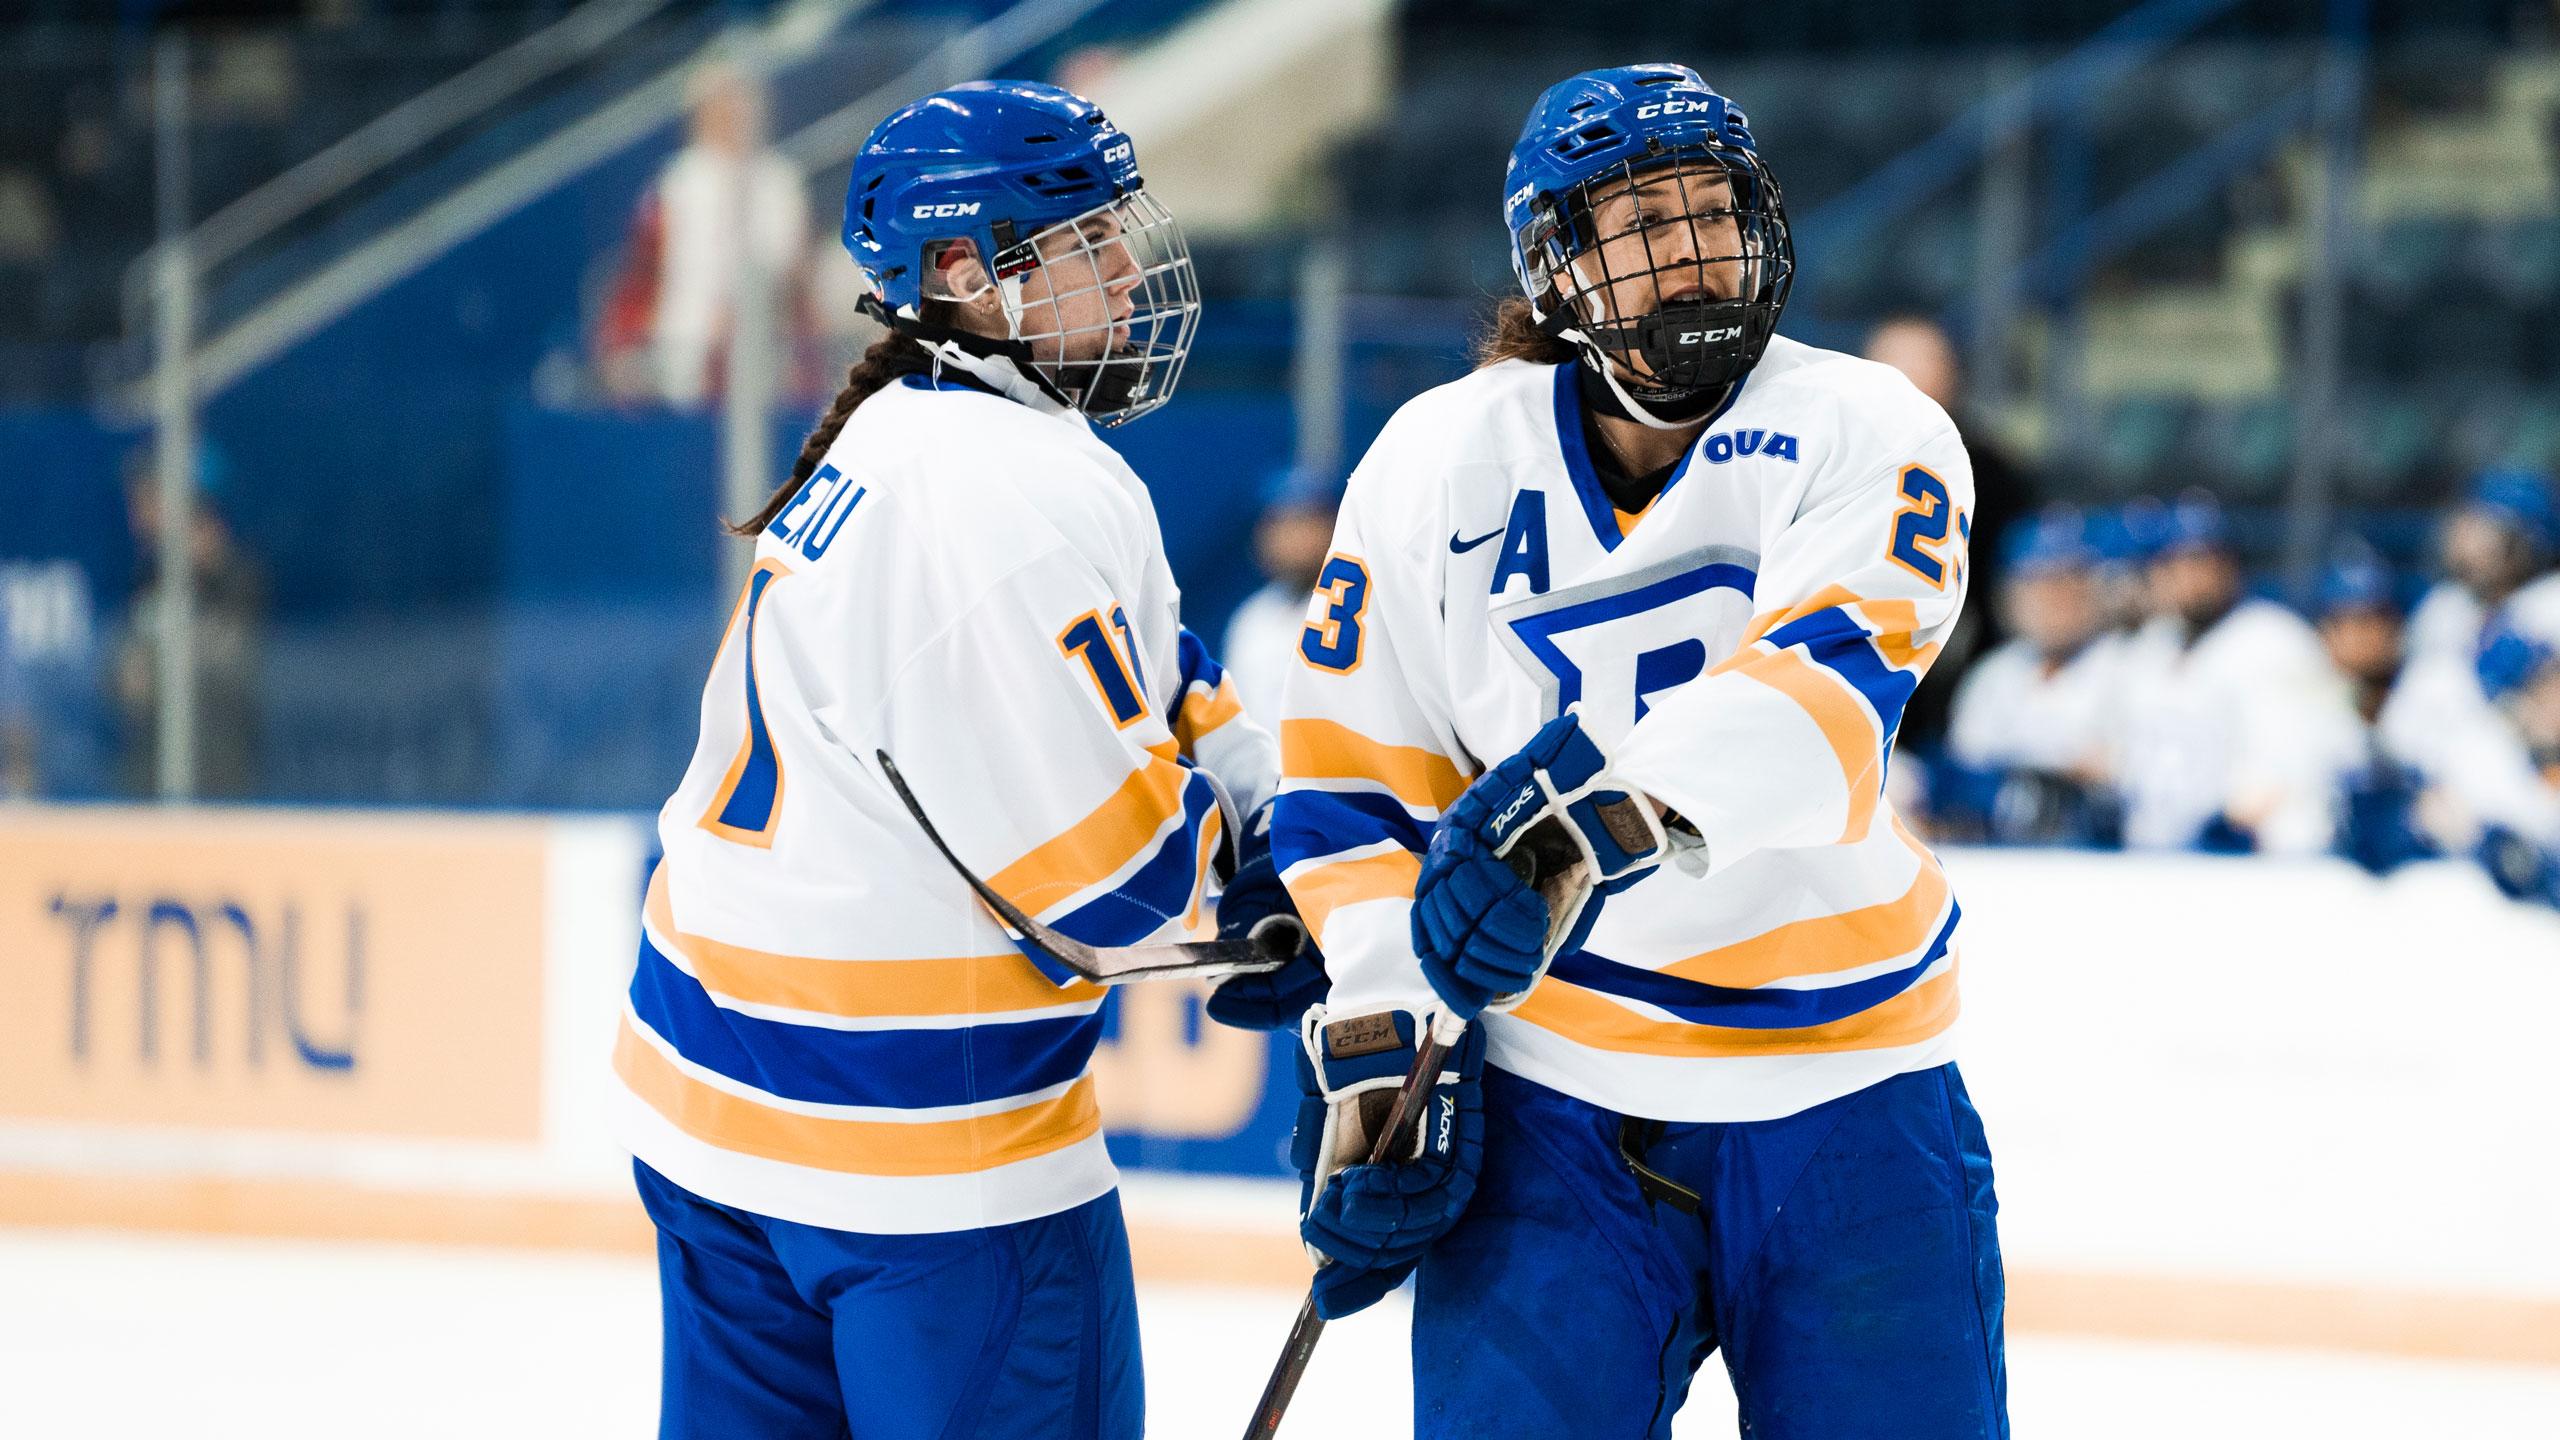 Two TMU women's hockey players in white jerseys talk to one another near centre ice